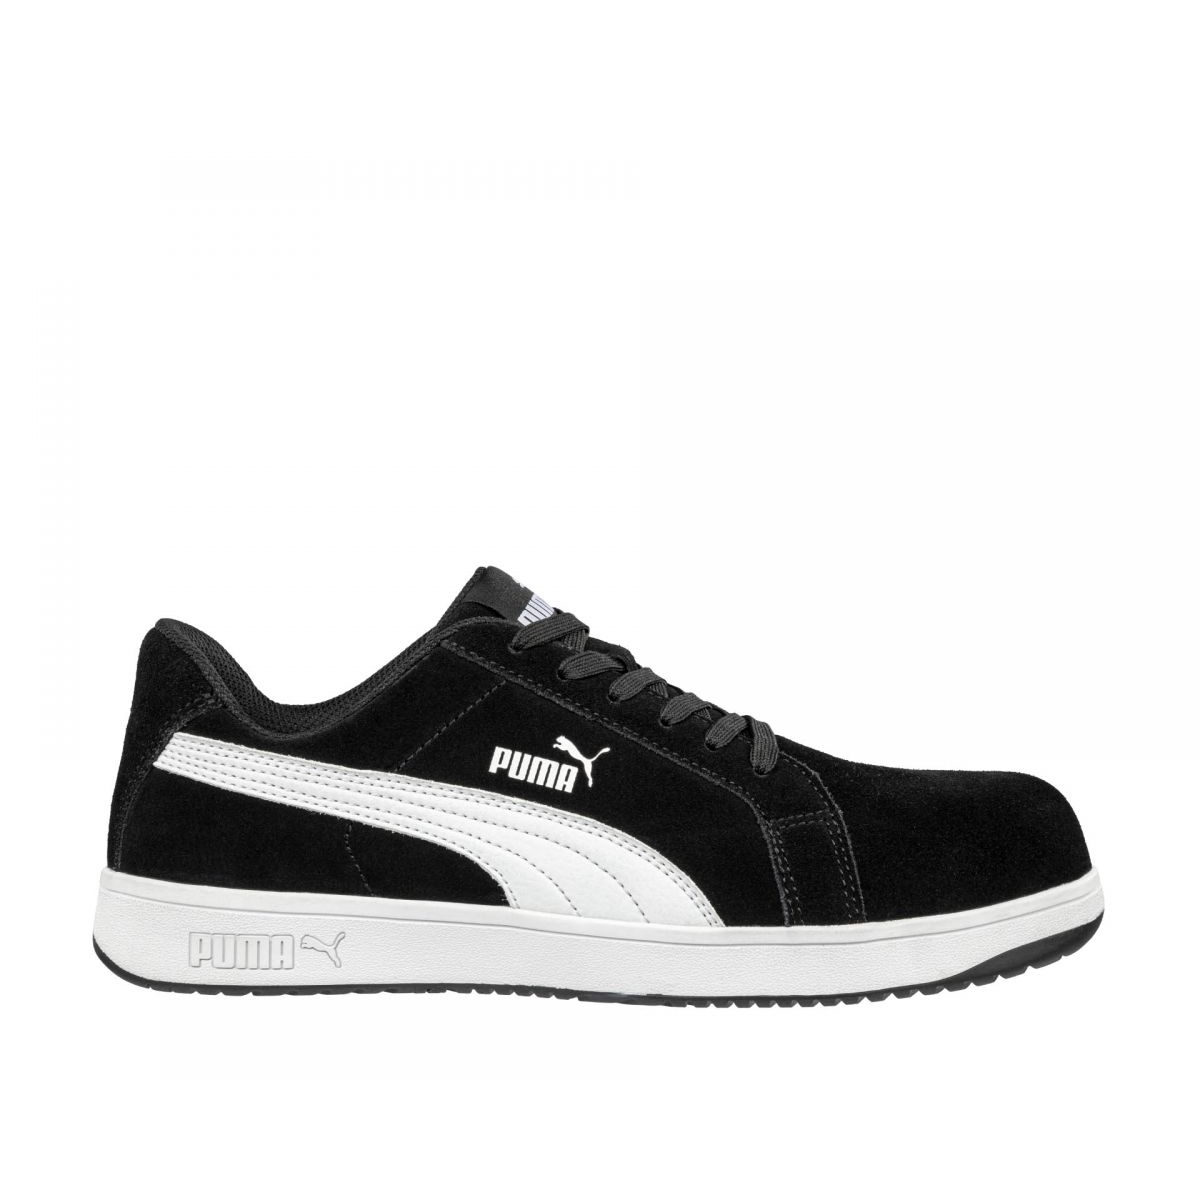 PUMA Safety Women's Iconic Low Composite Toe EH Work Shoes Black Suede - 640115 BLACK - BLACK, 7